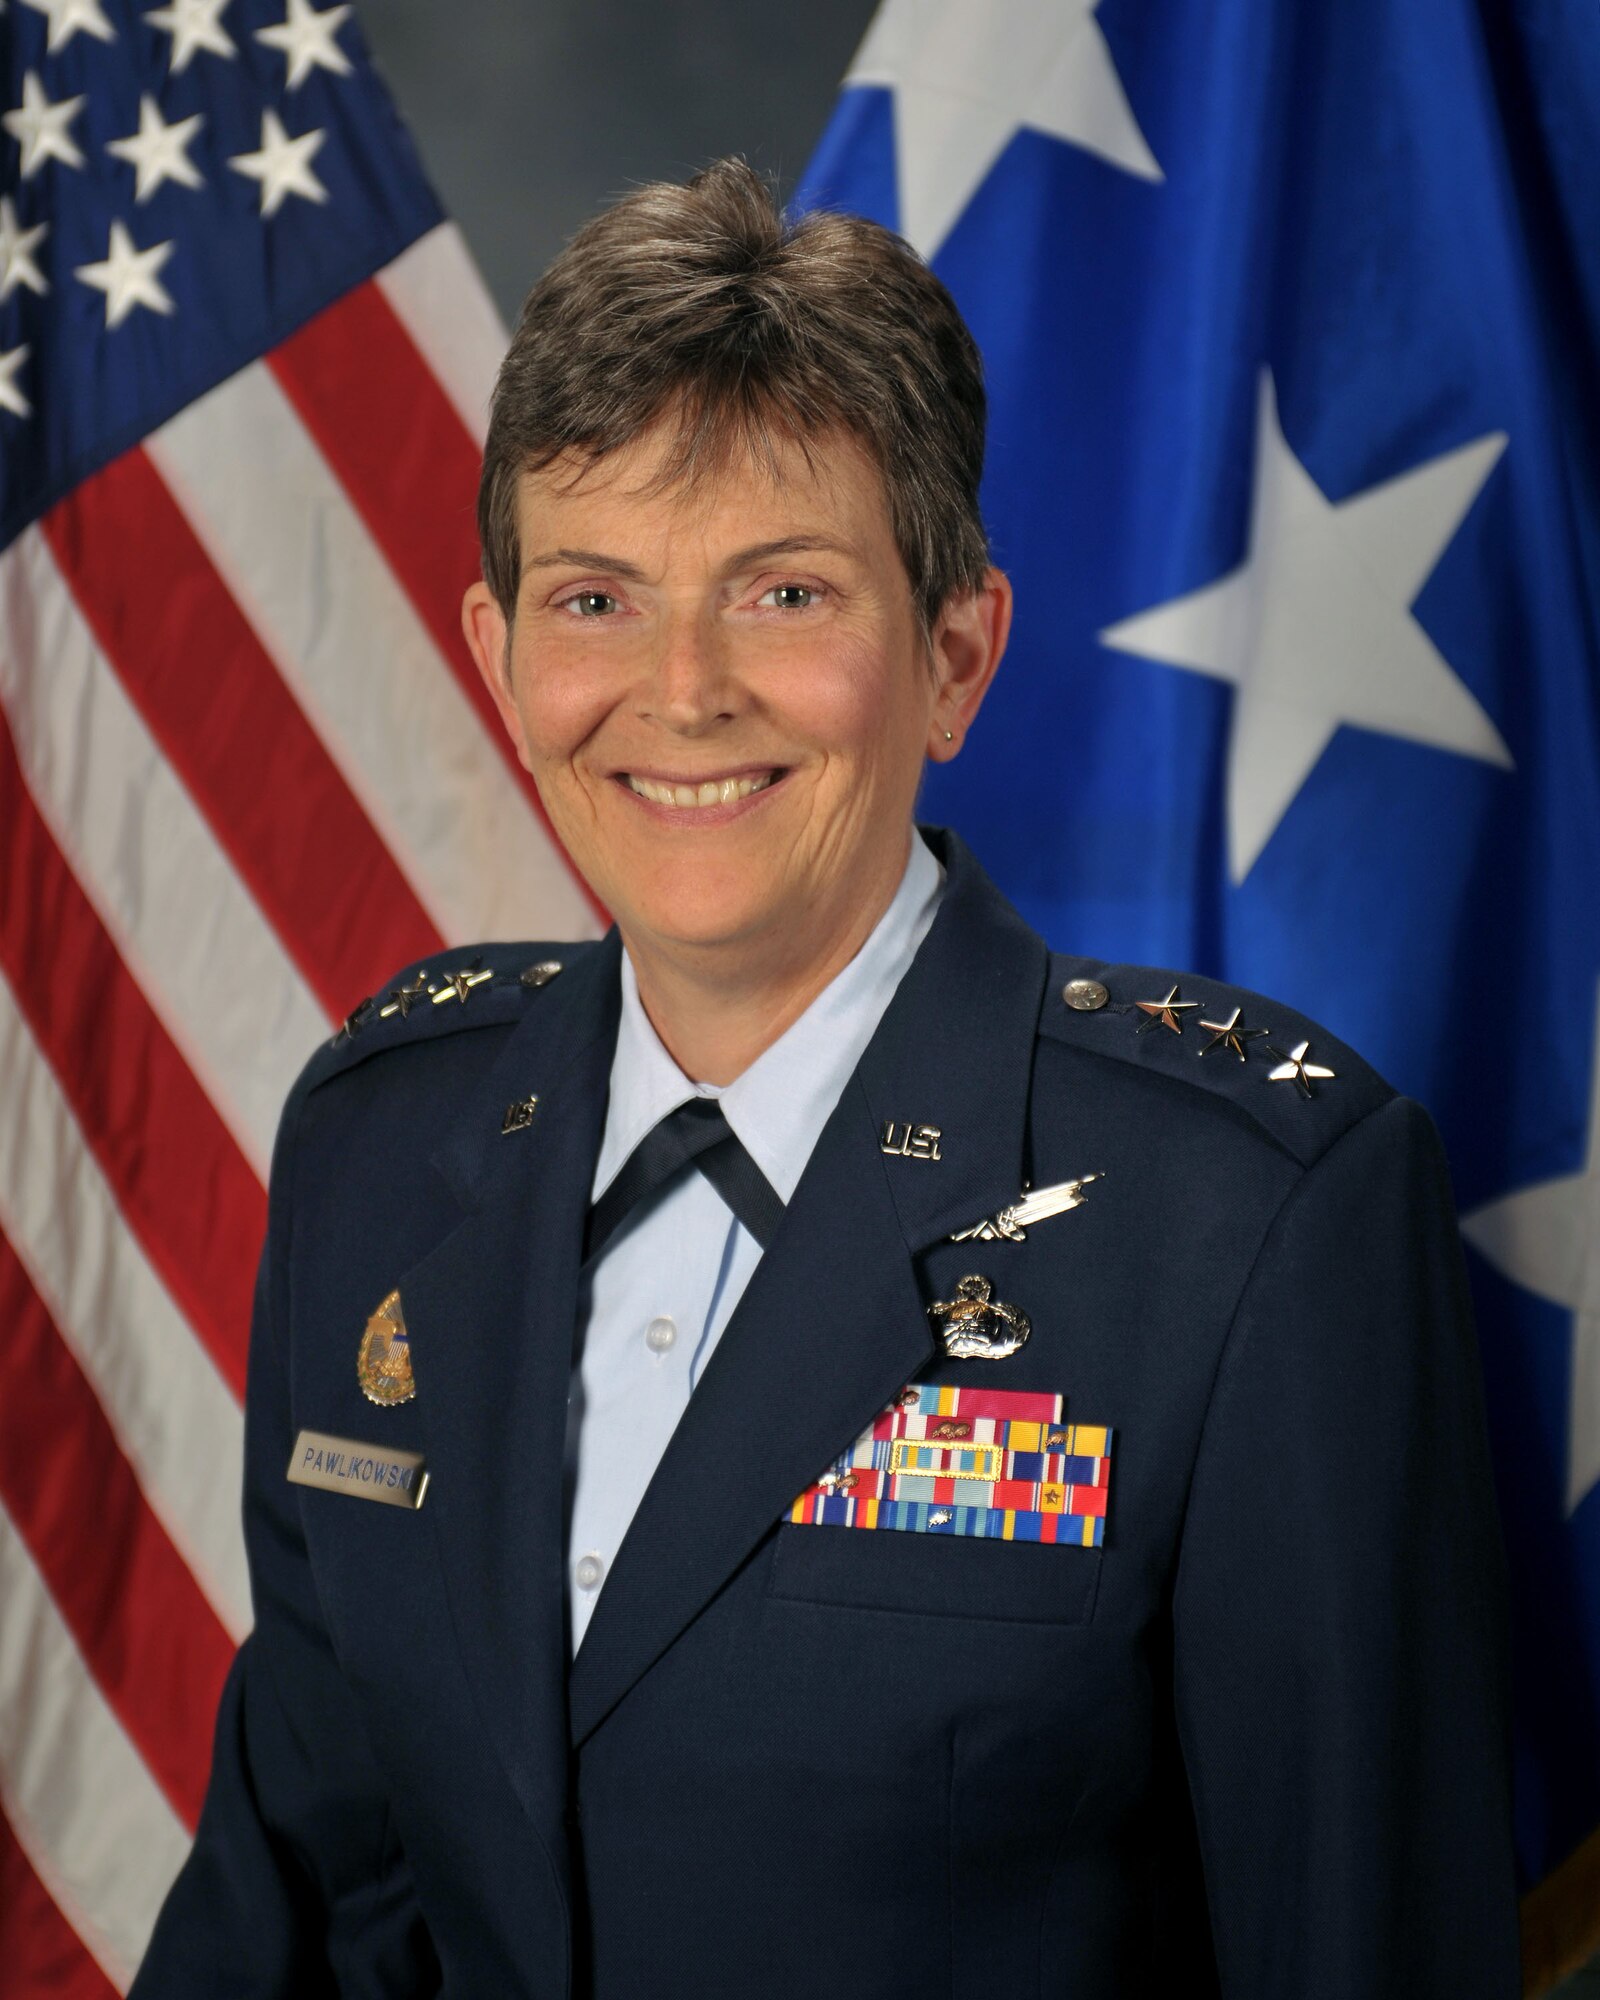 Official U.S. Air Force photo of Lt. Gen. Ellen M. Pawlikowski, commander, Space and Missile Systems Center, Los Angeles Air Force Base, Calif.